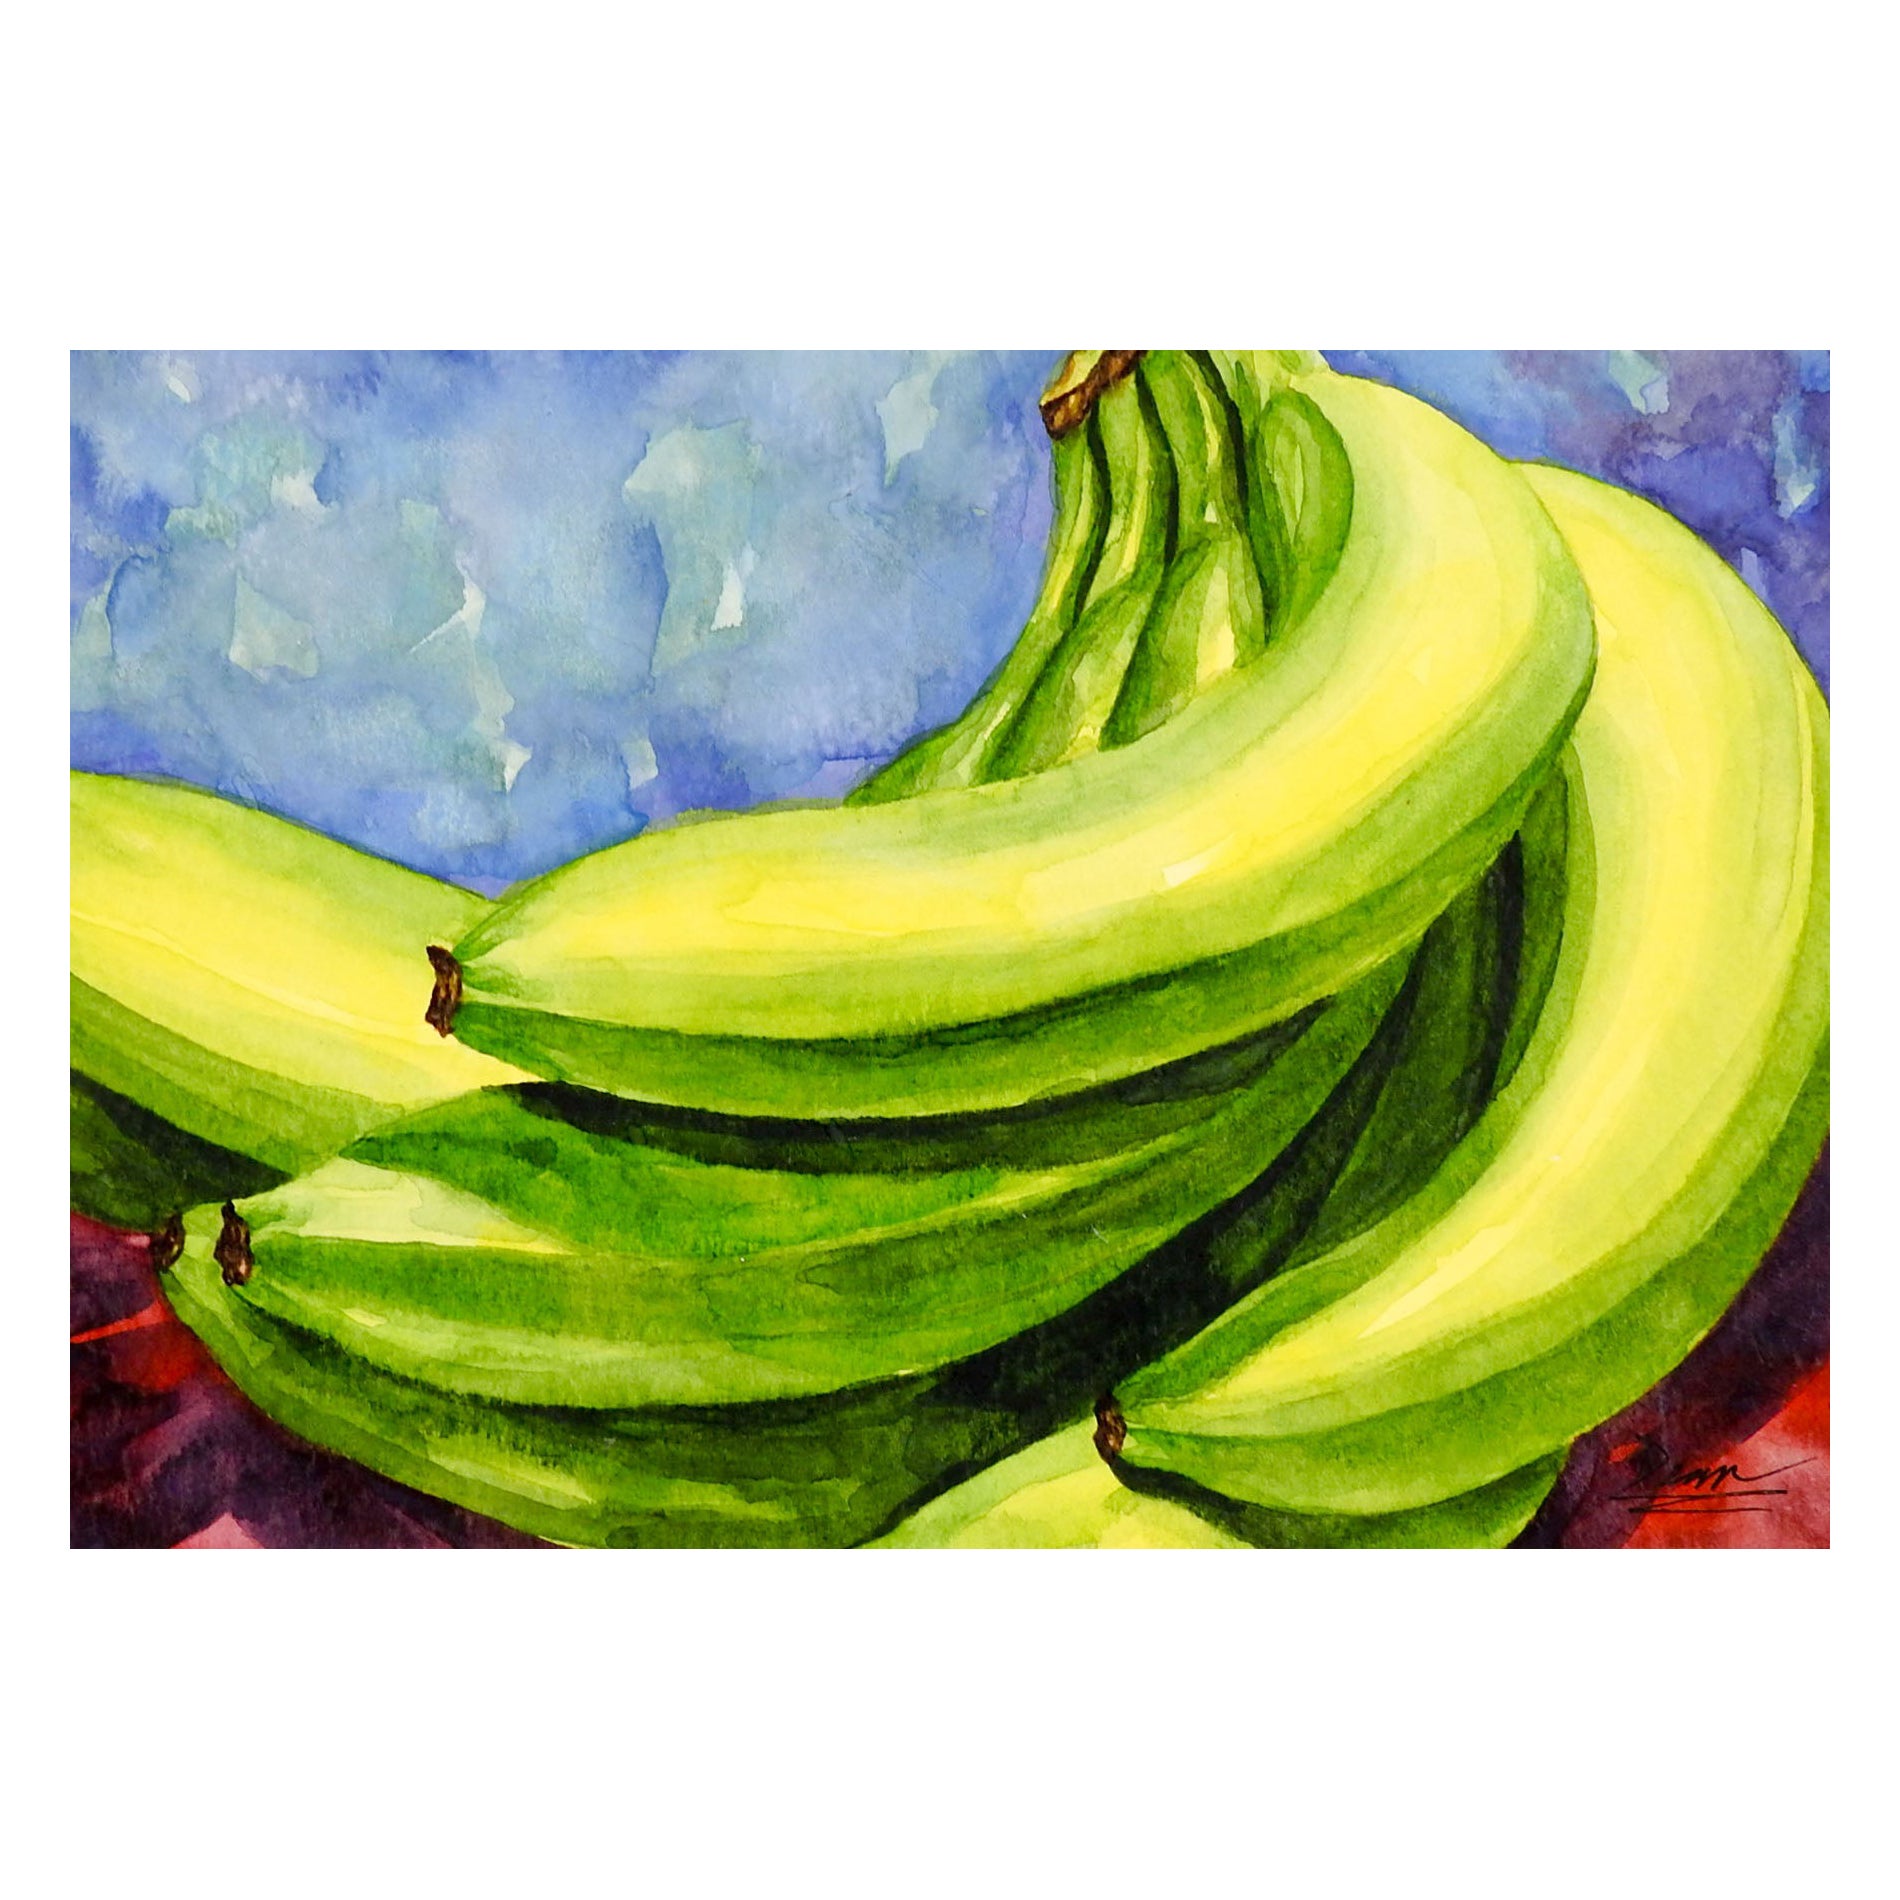 "Bananas" Watercolor Still Life Painting For Sale